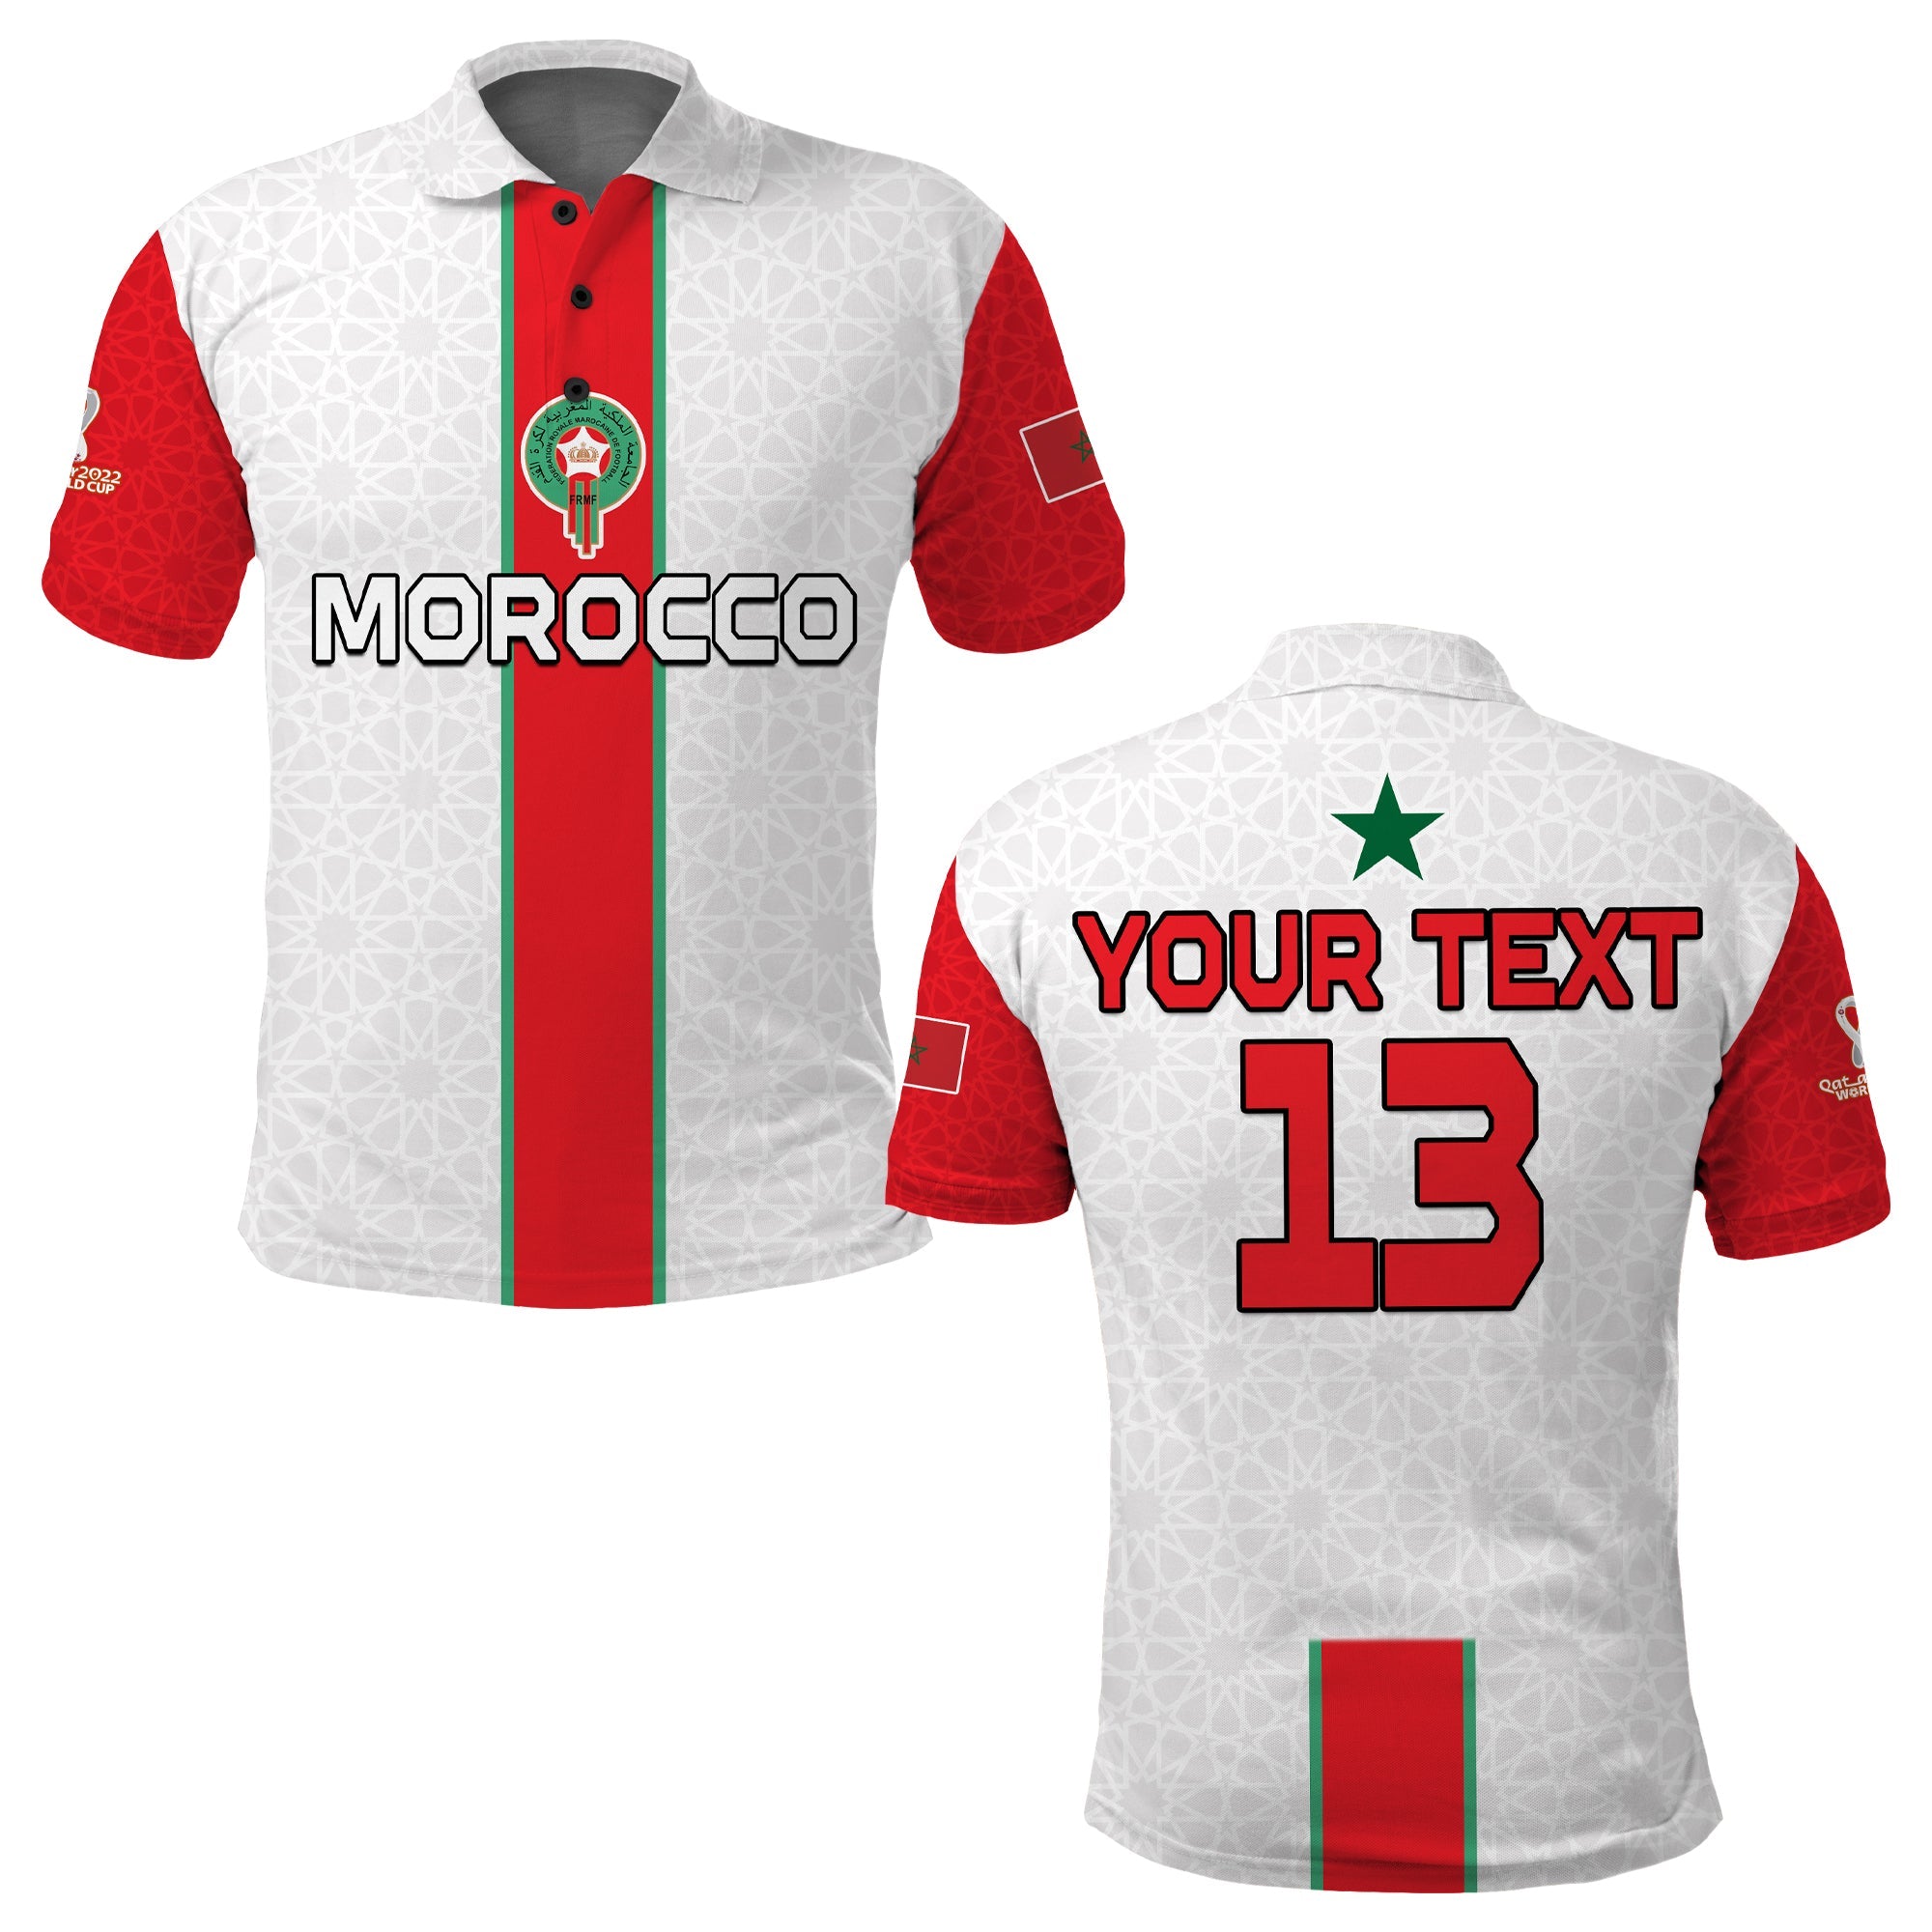 custom-text-and-number-morocco-football-polo-shirt-world-cup-2022-soccer-lions-de-latlas-champions